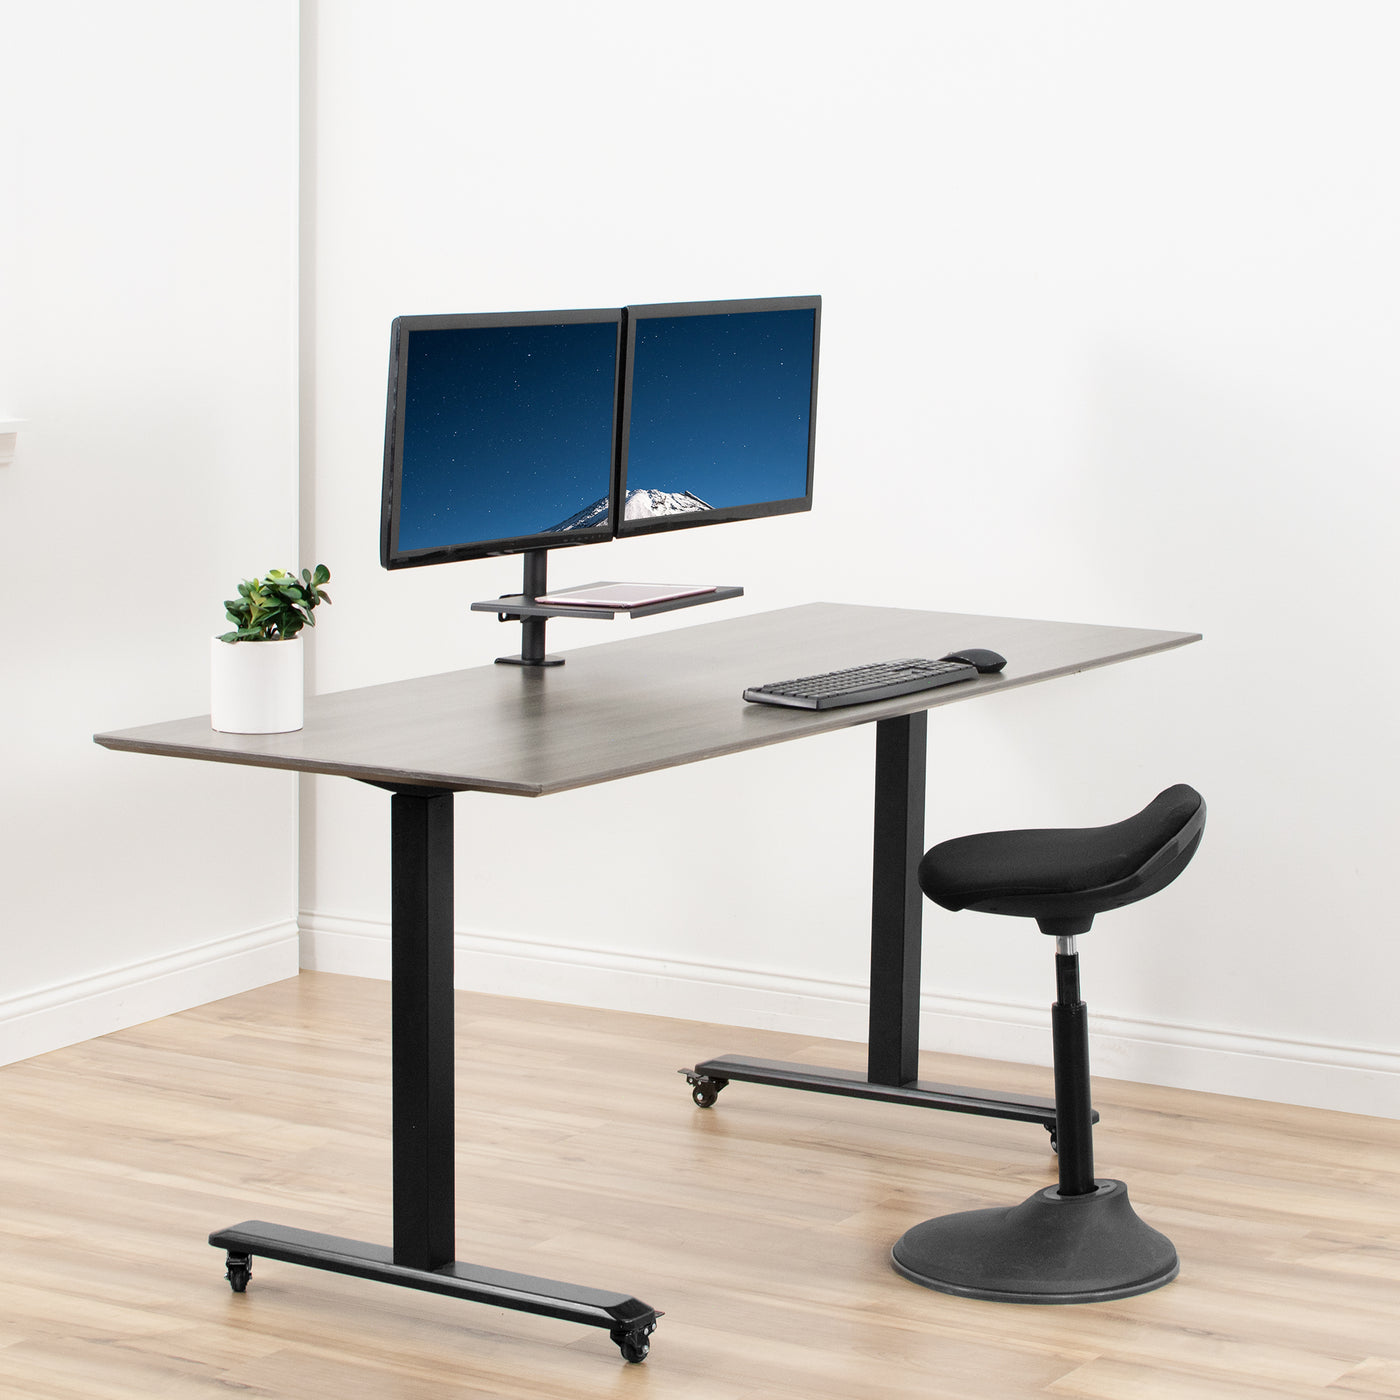  Active workspace with a modern touch and minimalist feel.